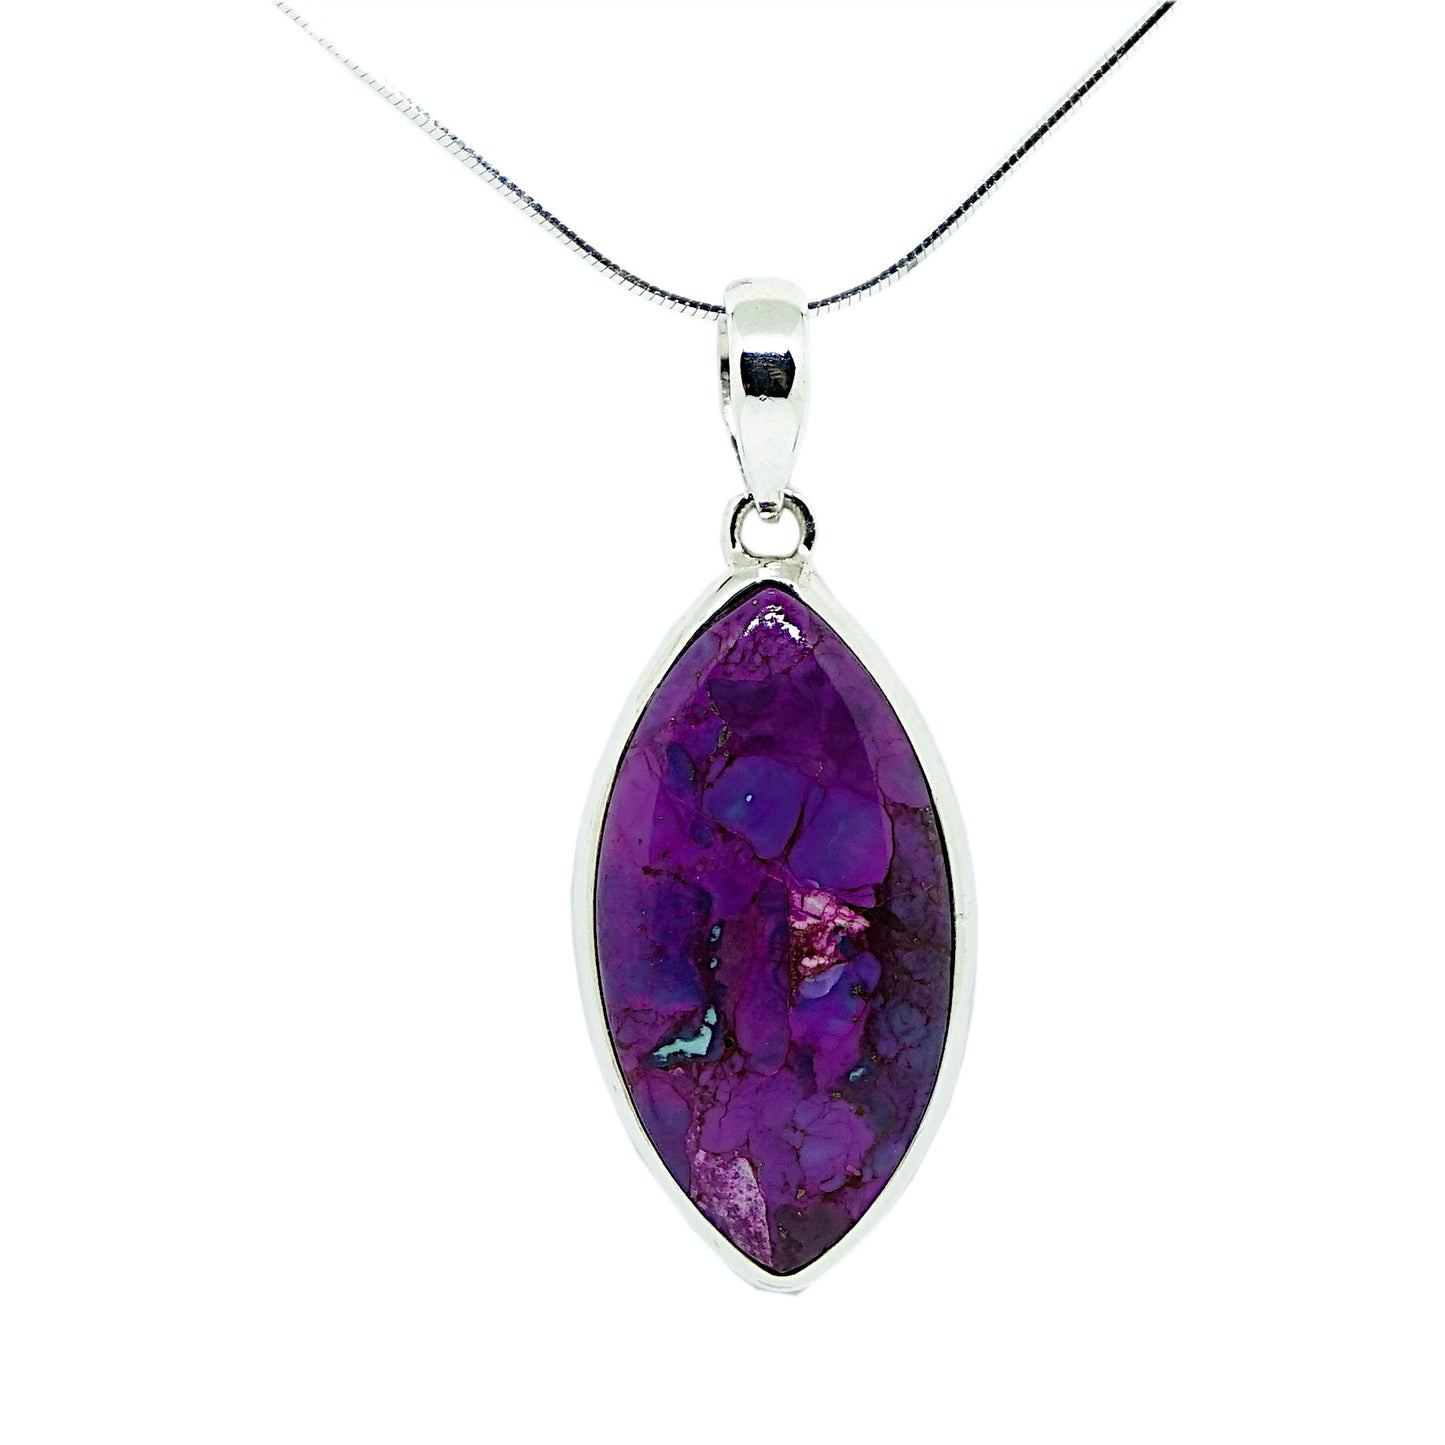 Purple Turquoise Sterling Silver Eye Shaped Pendant and Chain